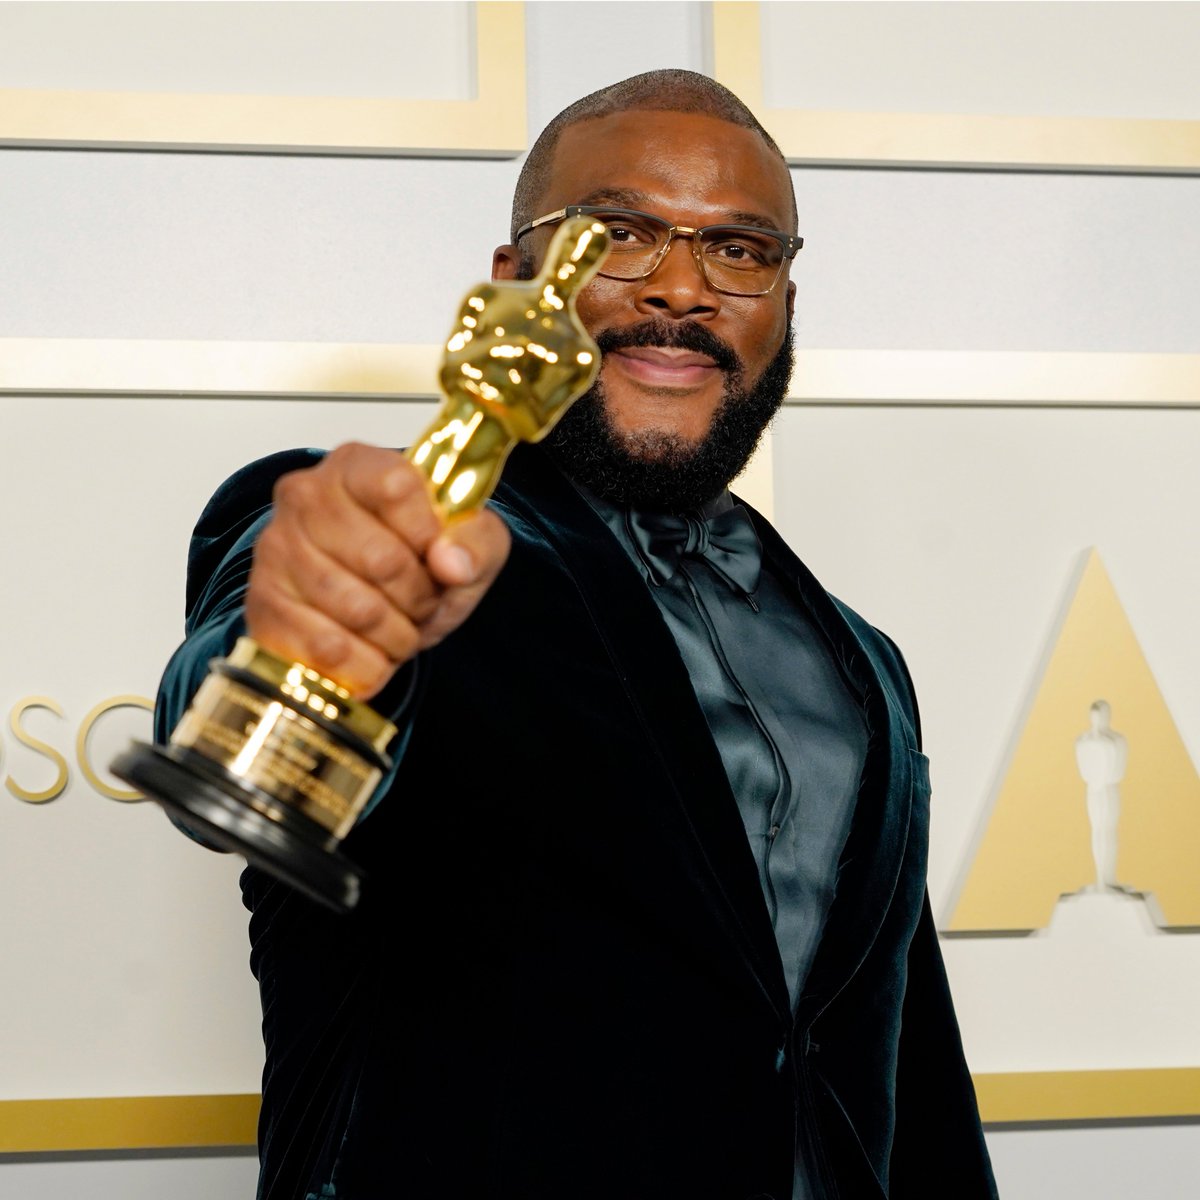 Look at you @tylerperry! Emmy and Oscar back to back. Happy to meet you in the middle! #Oscars 